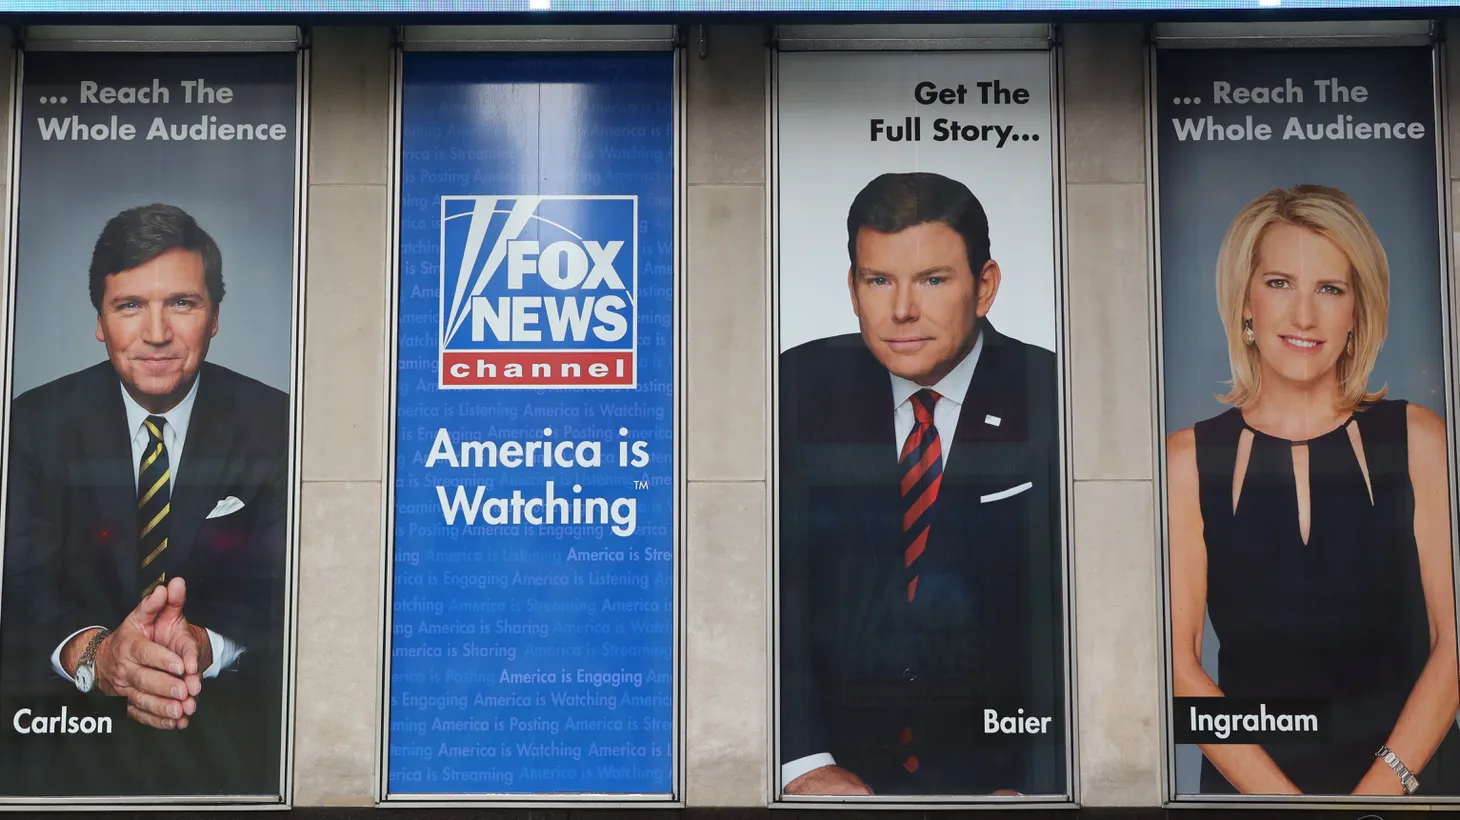 A Fox News Channel poster is displayed at the News Corporation headquarters building in New York City.